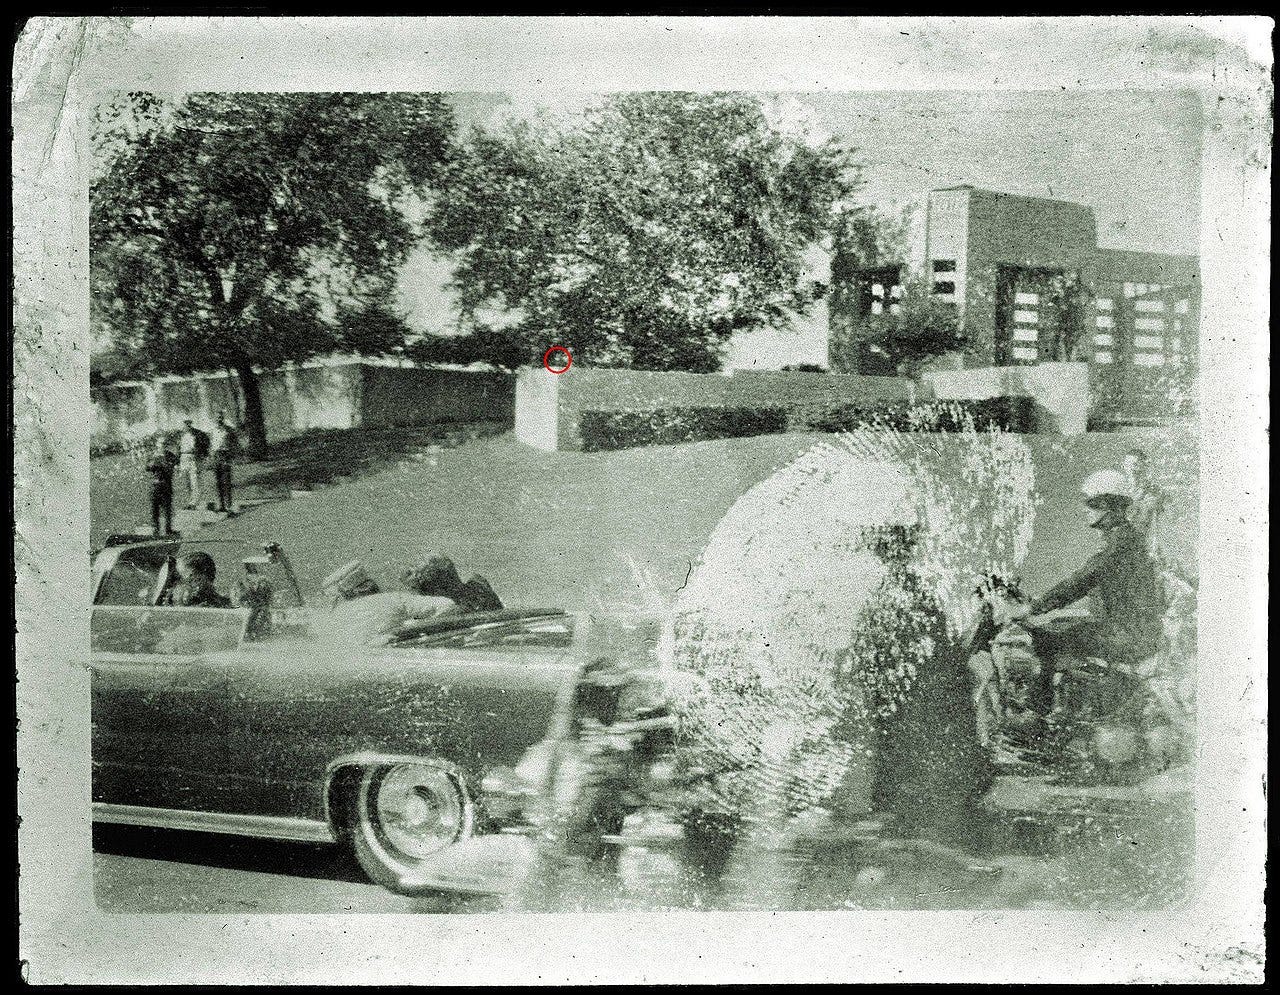 Kennedy is seen slumped over in his presidential limo immediately after being shot. A grassy hill with a wooden fence on top is seen in the background. No Badge Man is immediately visible.